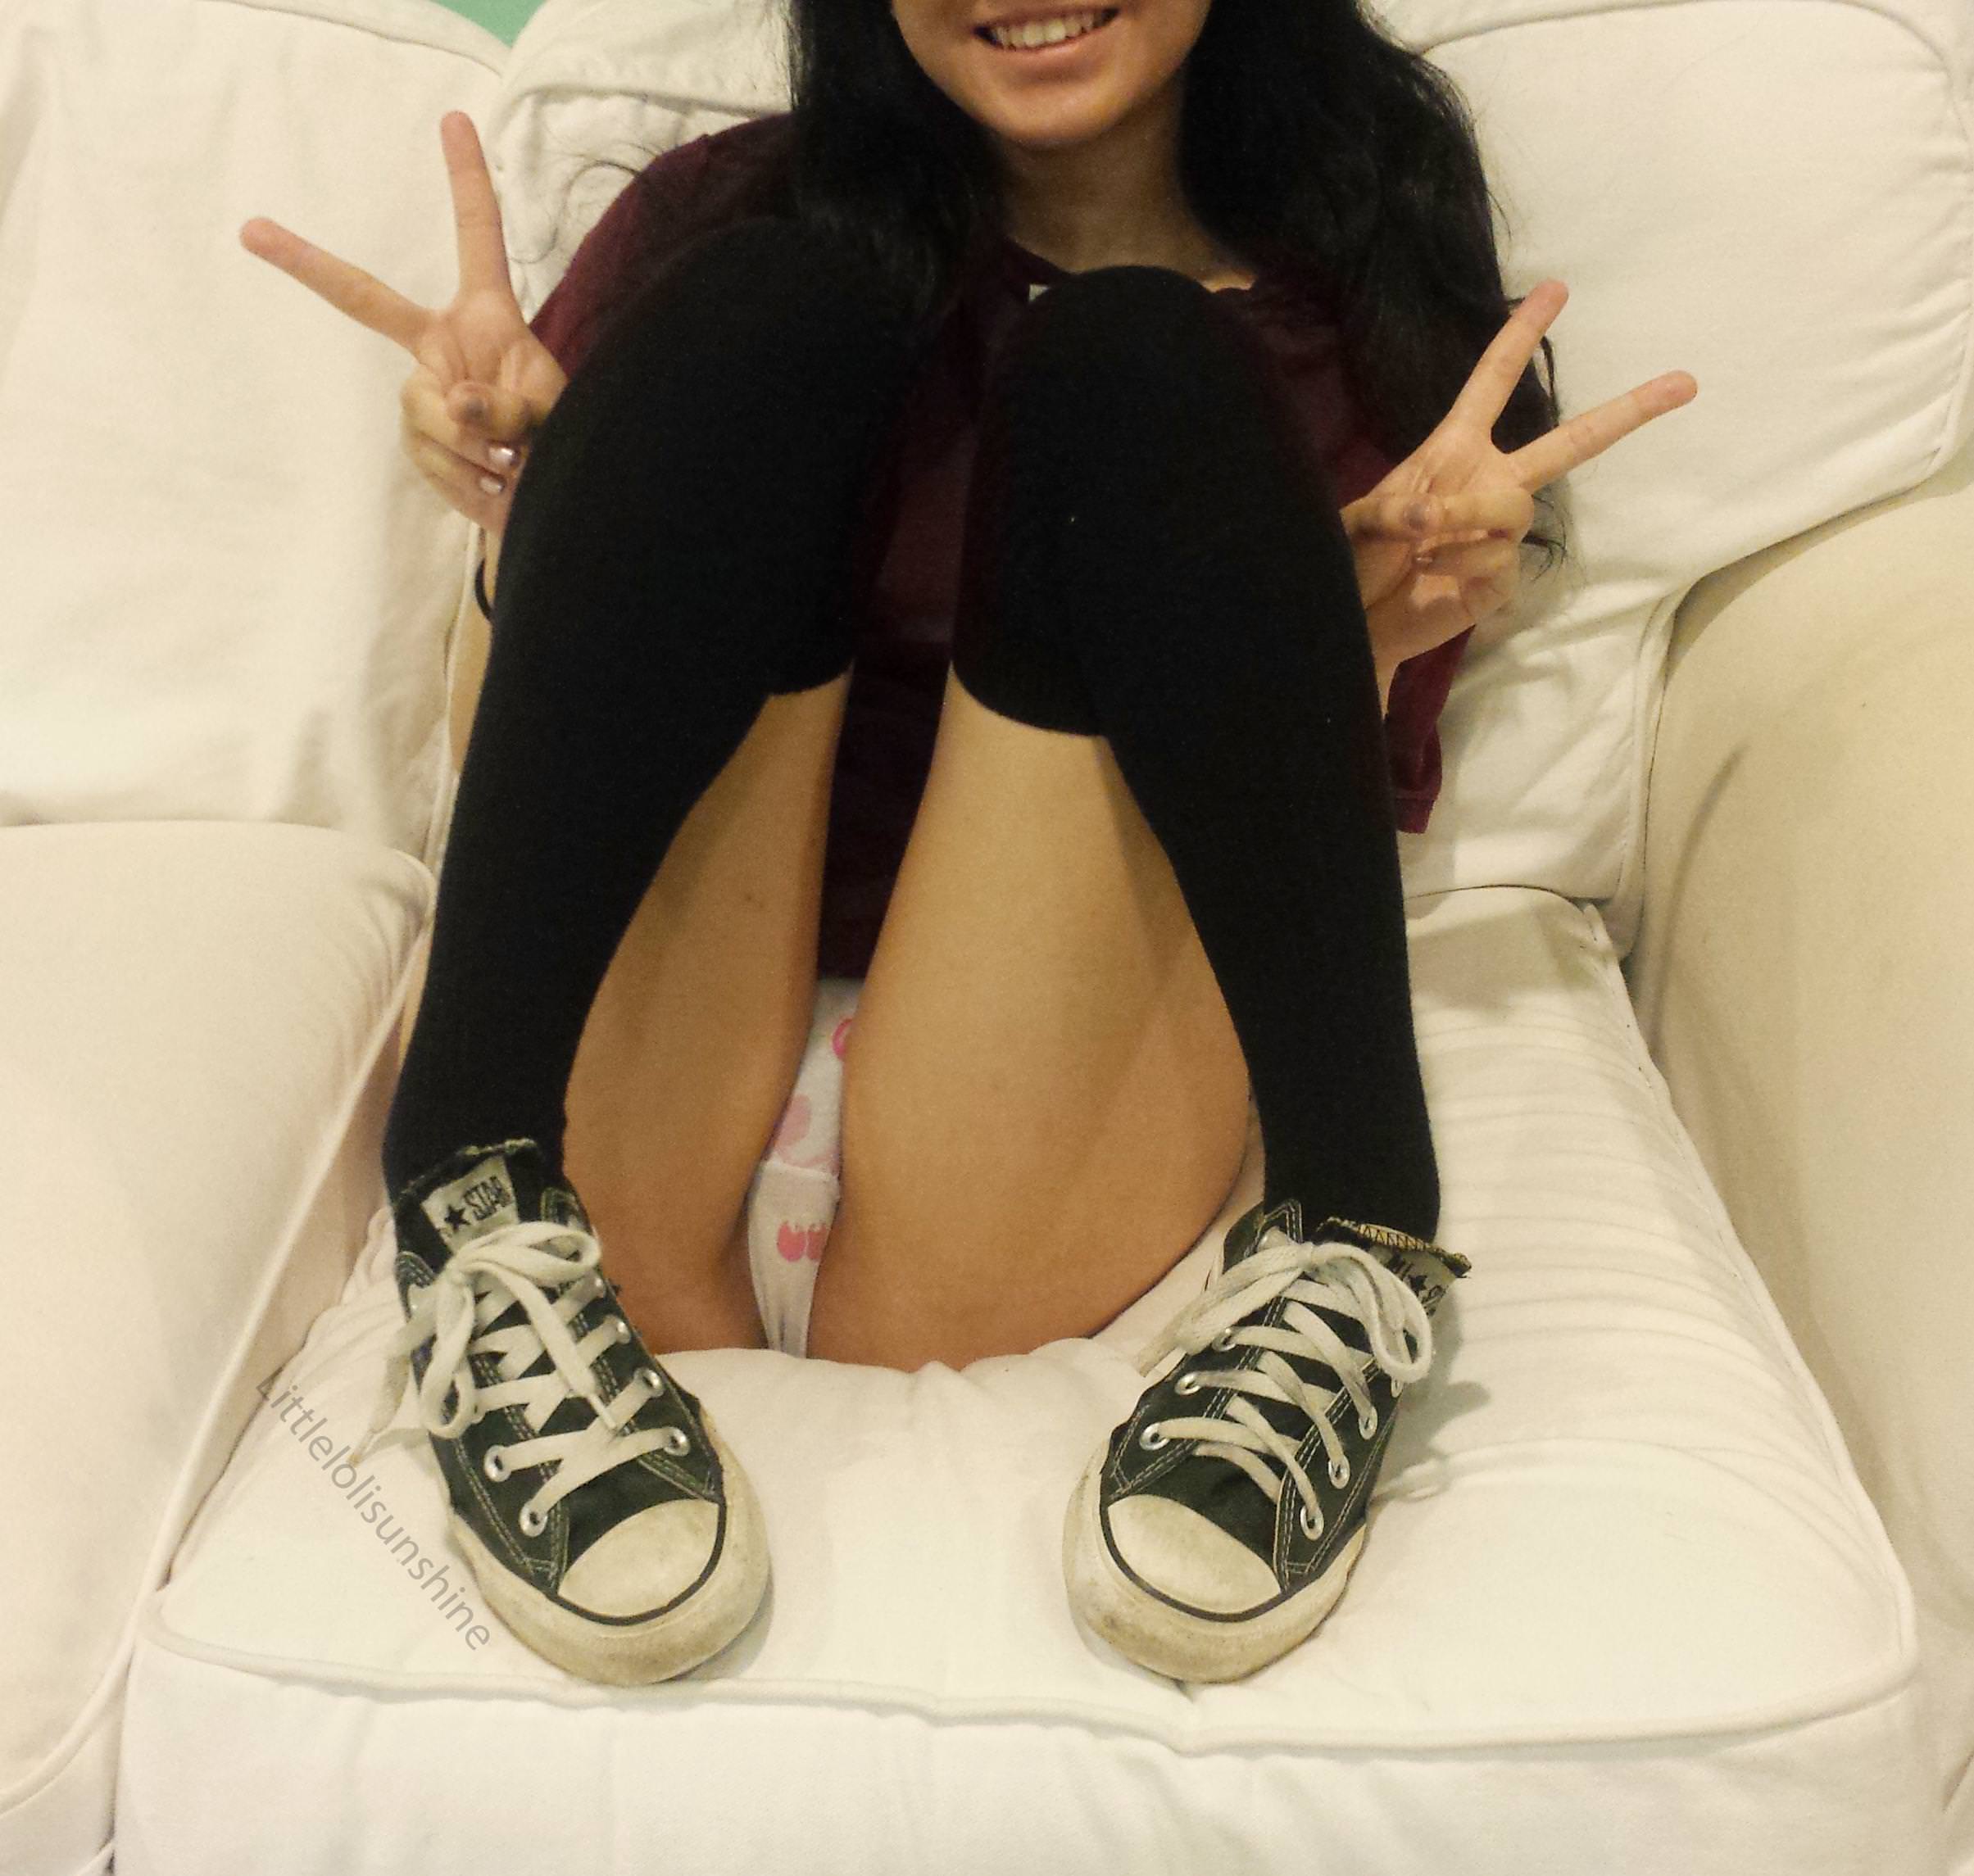 Casual Pic Of Converse And Thigh Highs